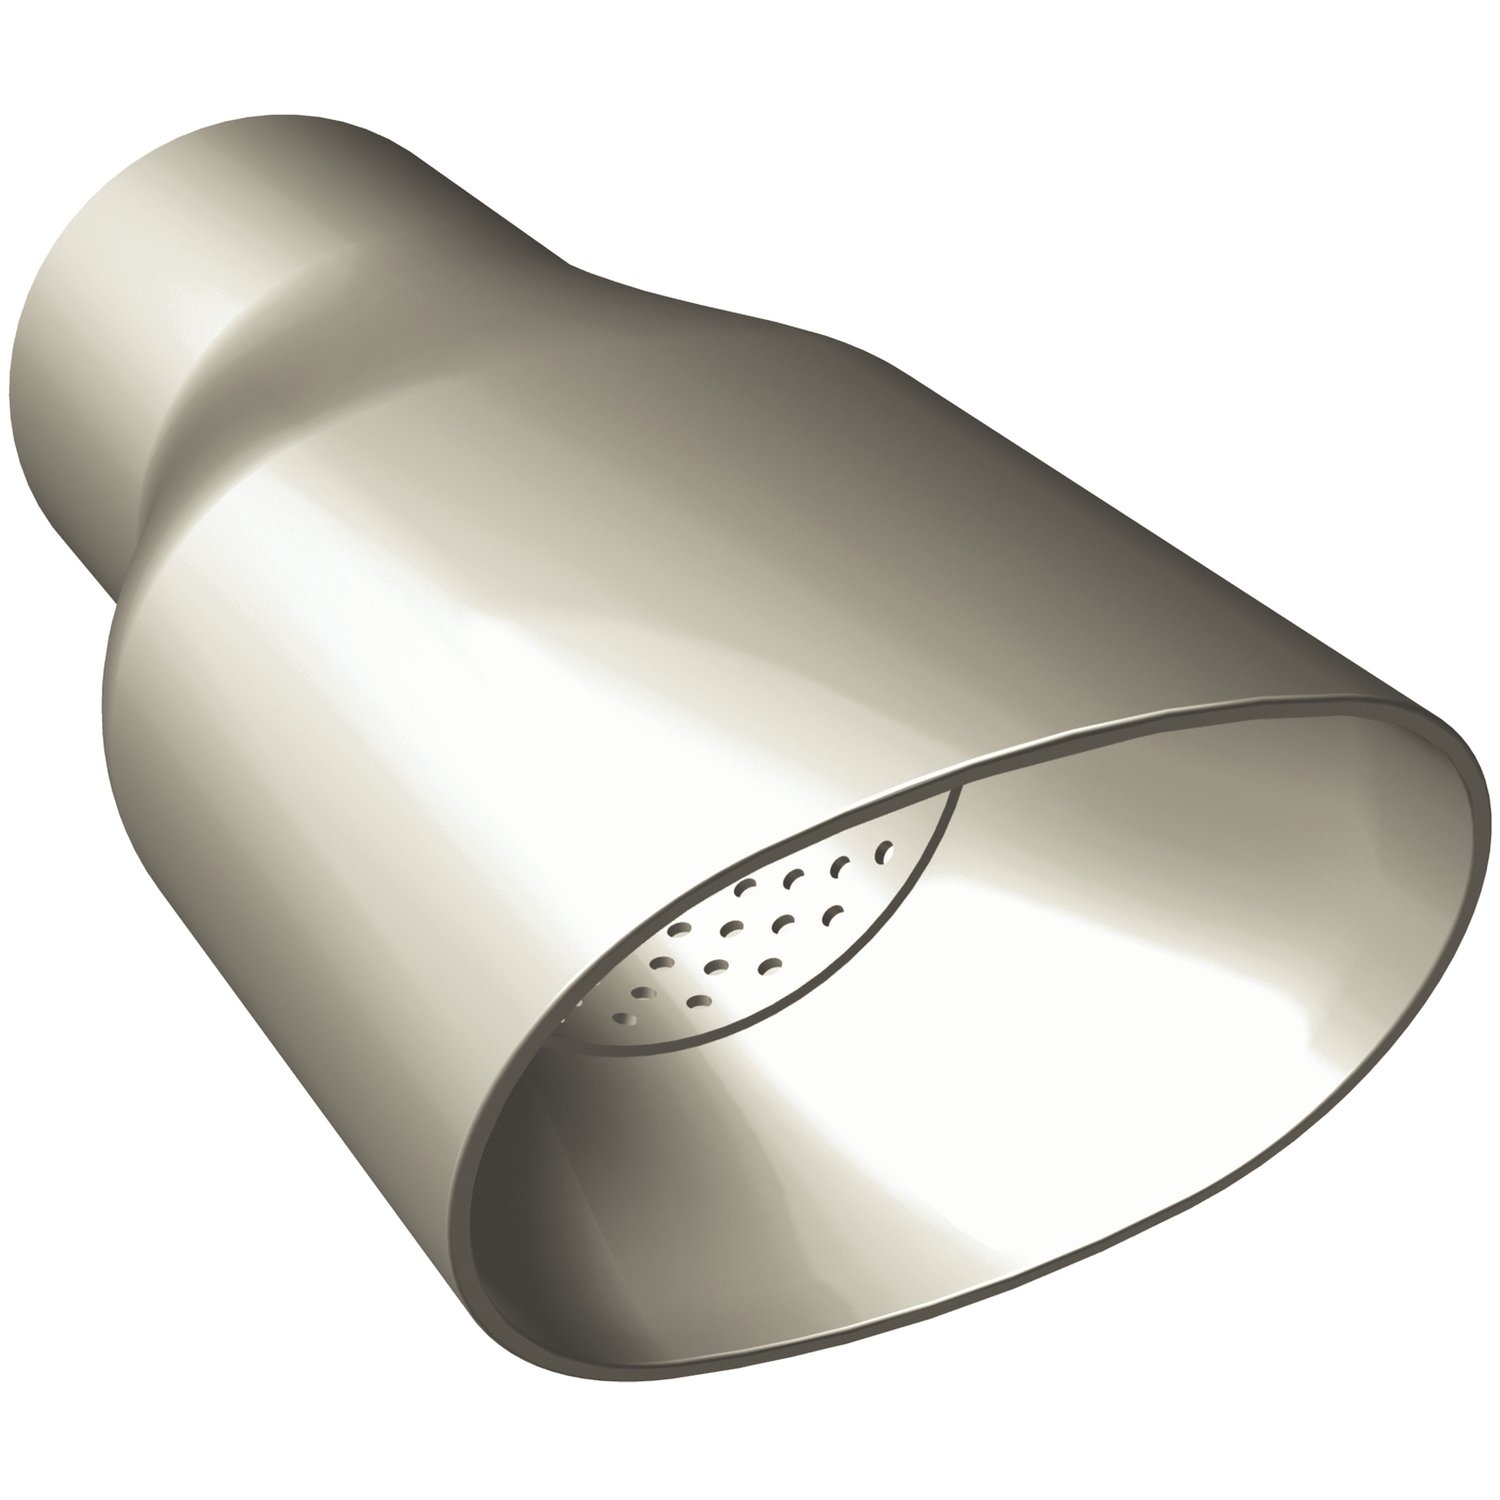 Polished Stainless Steel Weld-On Single Exhaust Tip Inlet Inside Diameter: 3"